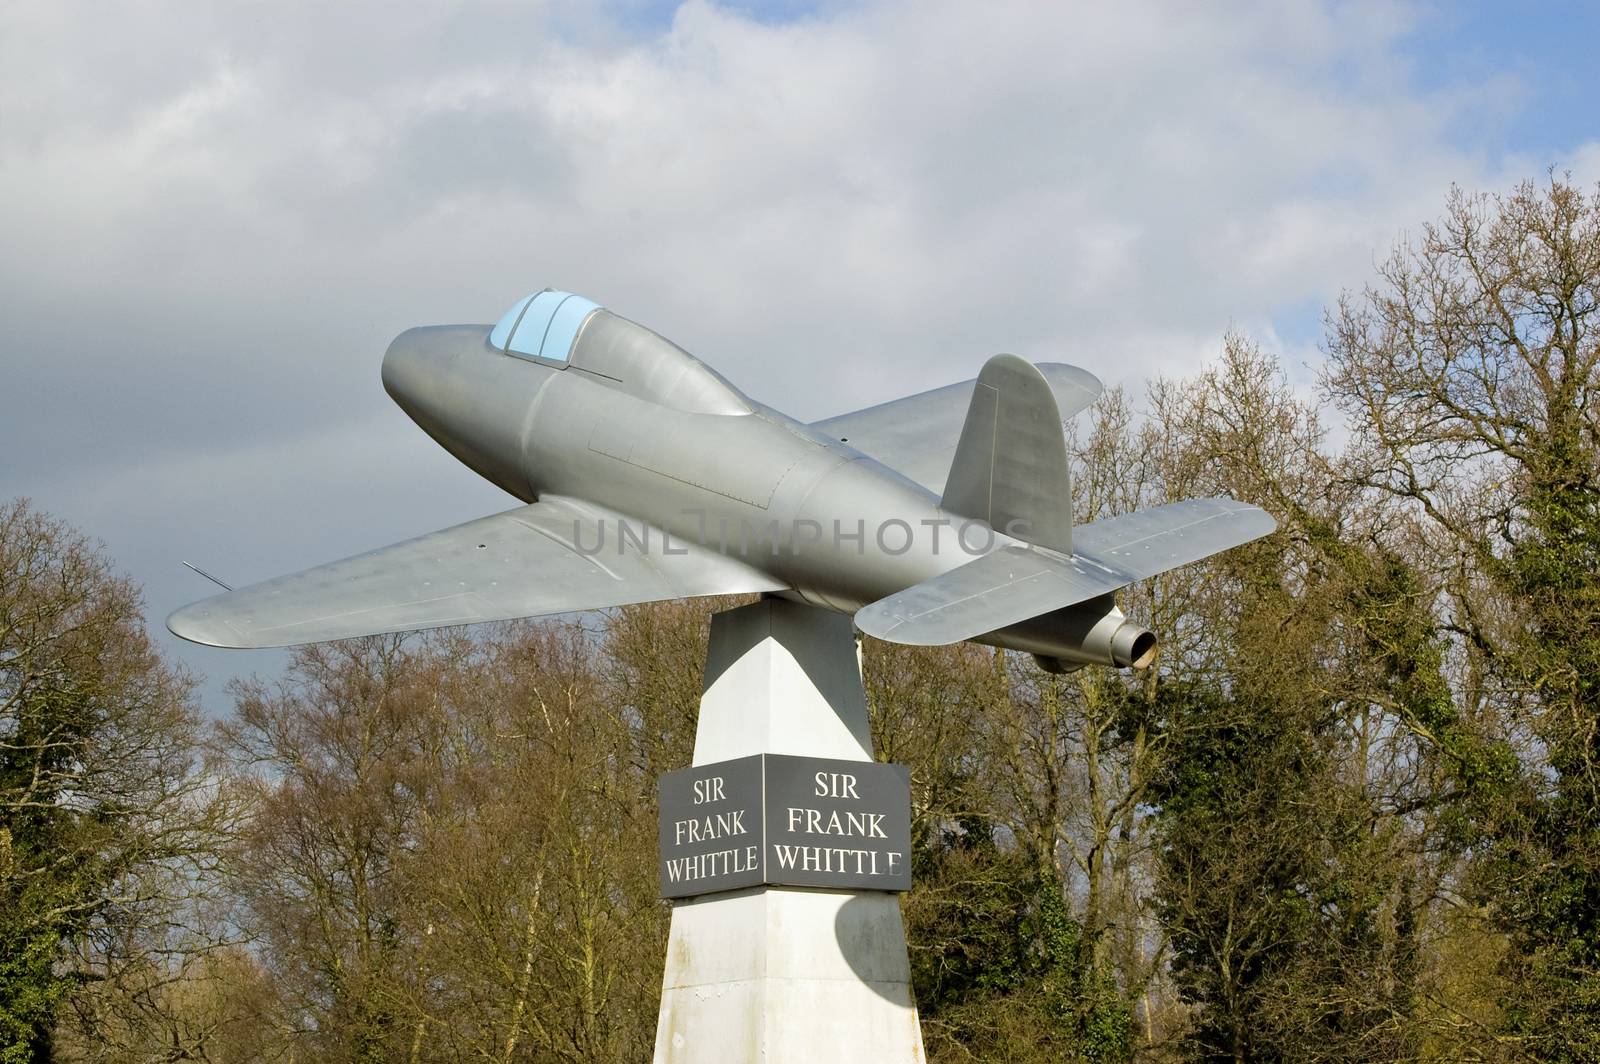 A memorial dedicated to the inventor of jet propulsion - Frank Whittle (1907 – 1996). Edge of Farnborough Airport is a full scale model of Britain's first jet engined aircraft.